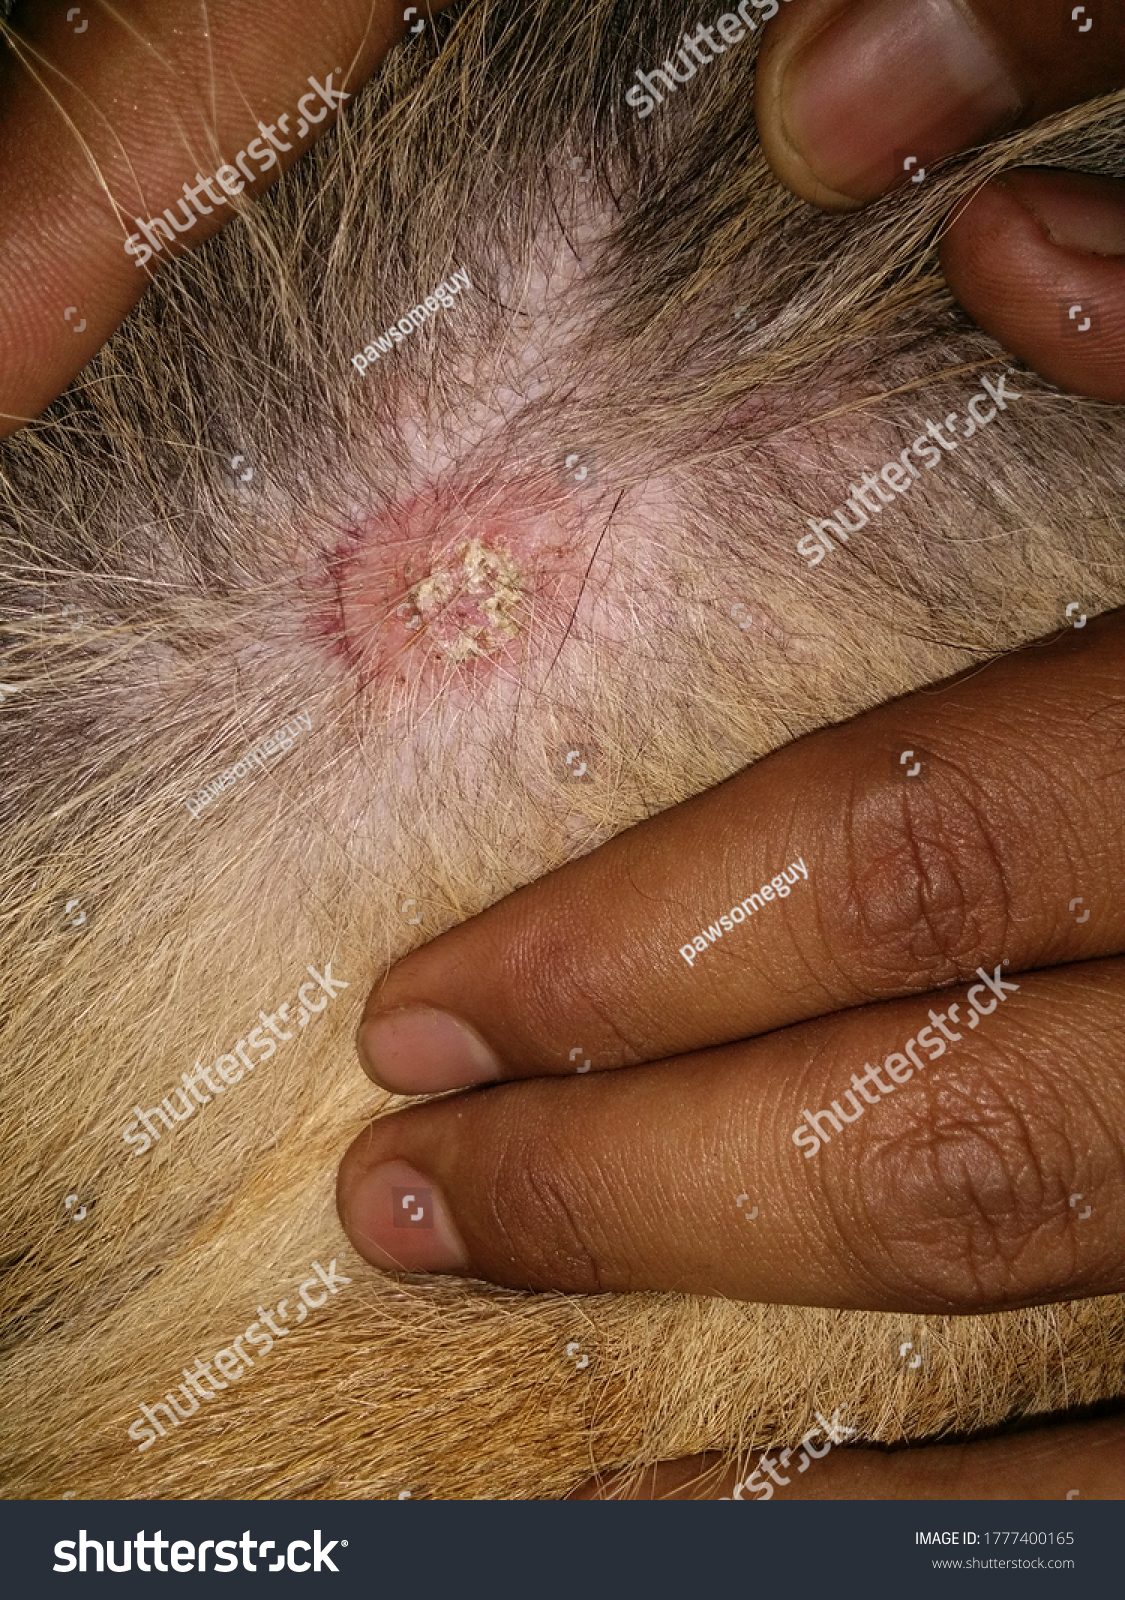 what causes ringworm in a dog